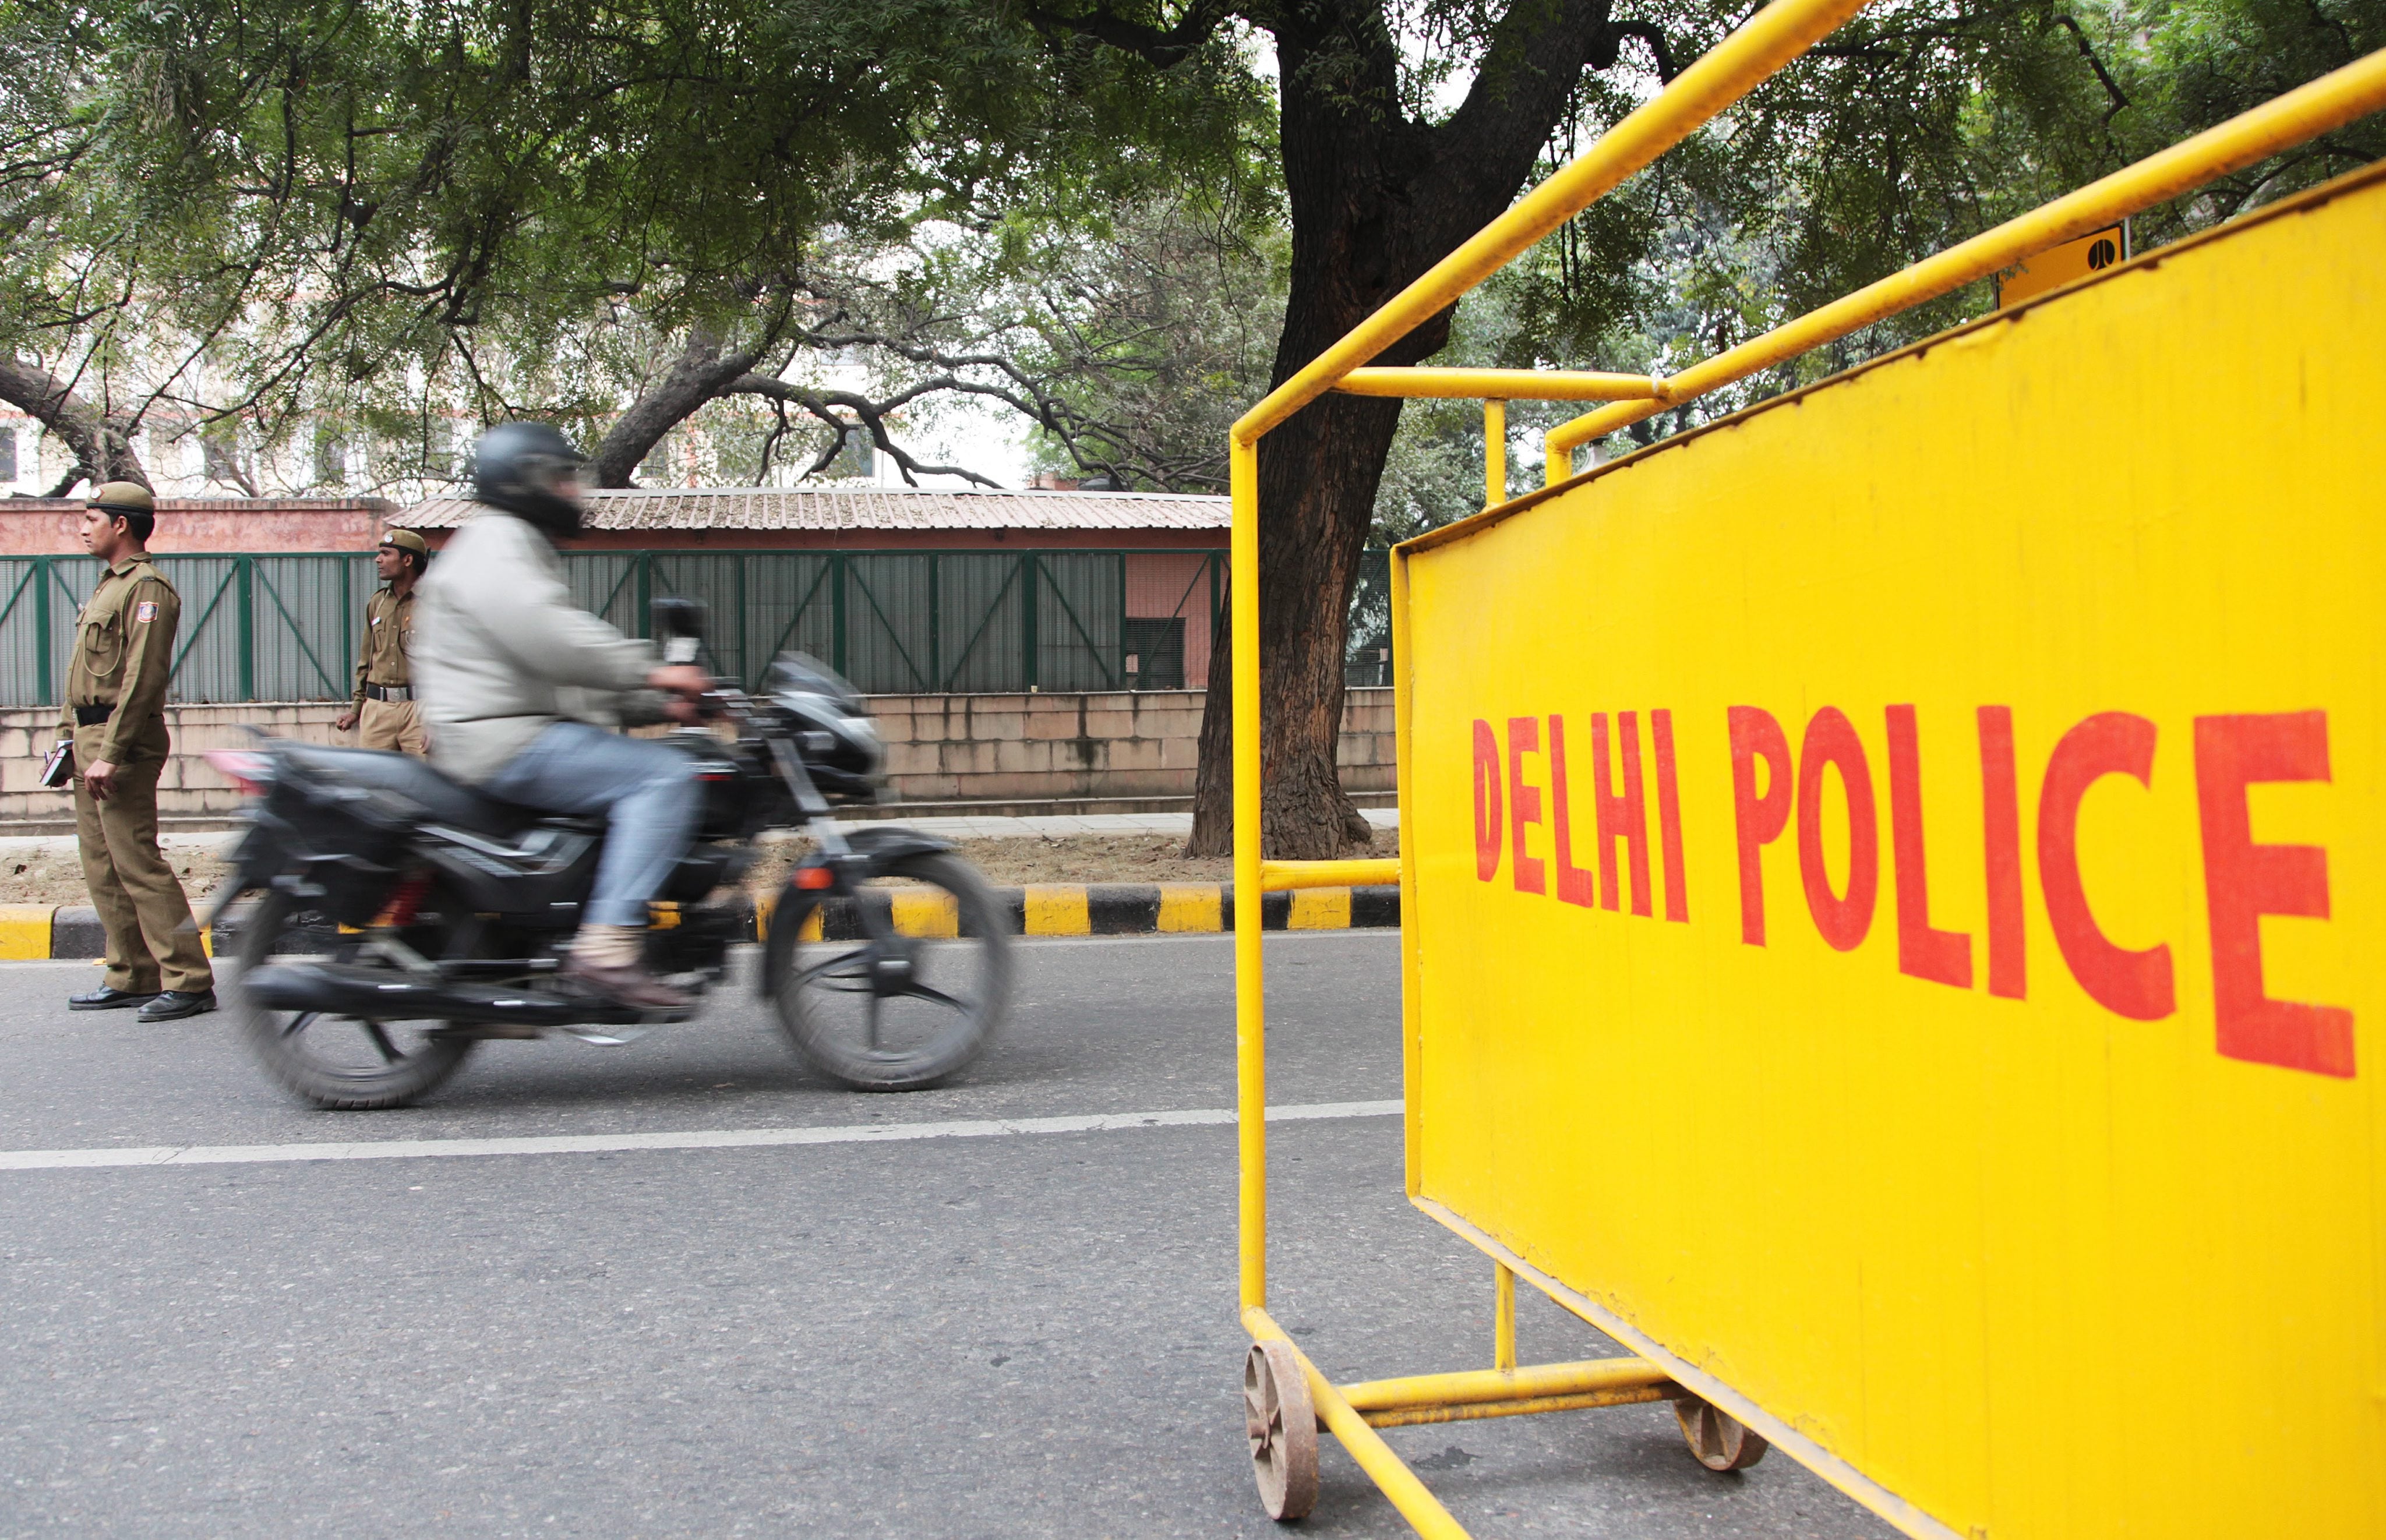 Delhi police have arrested two persons in relation to the firing incident